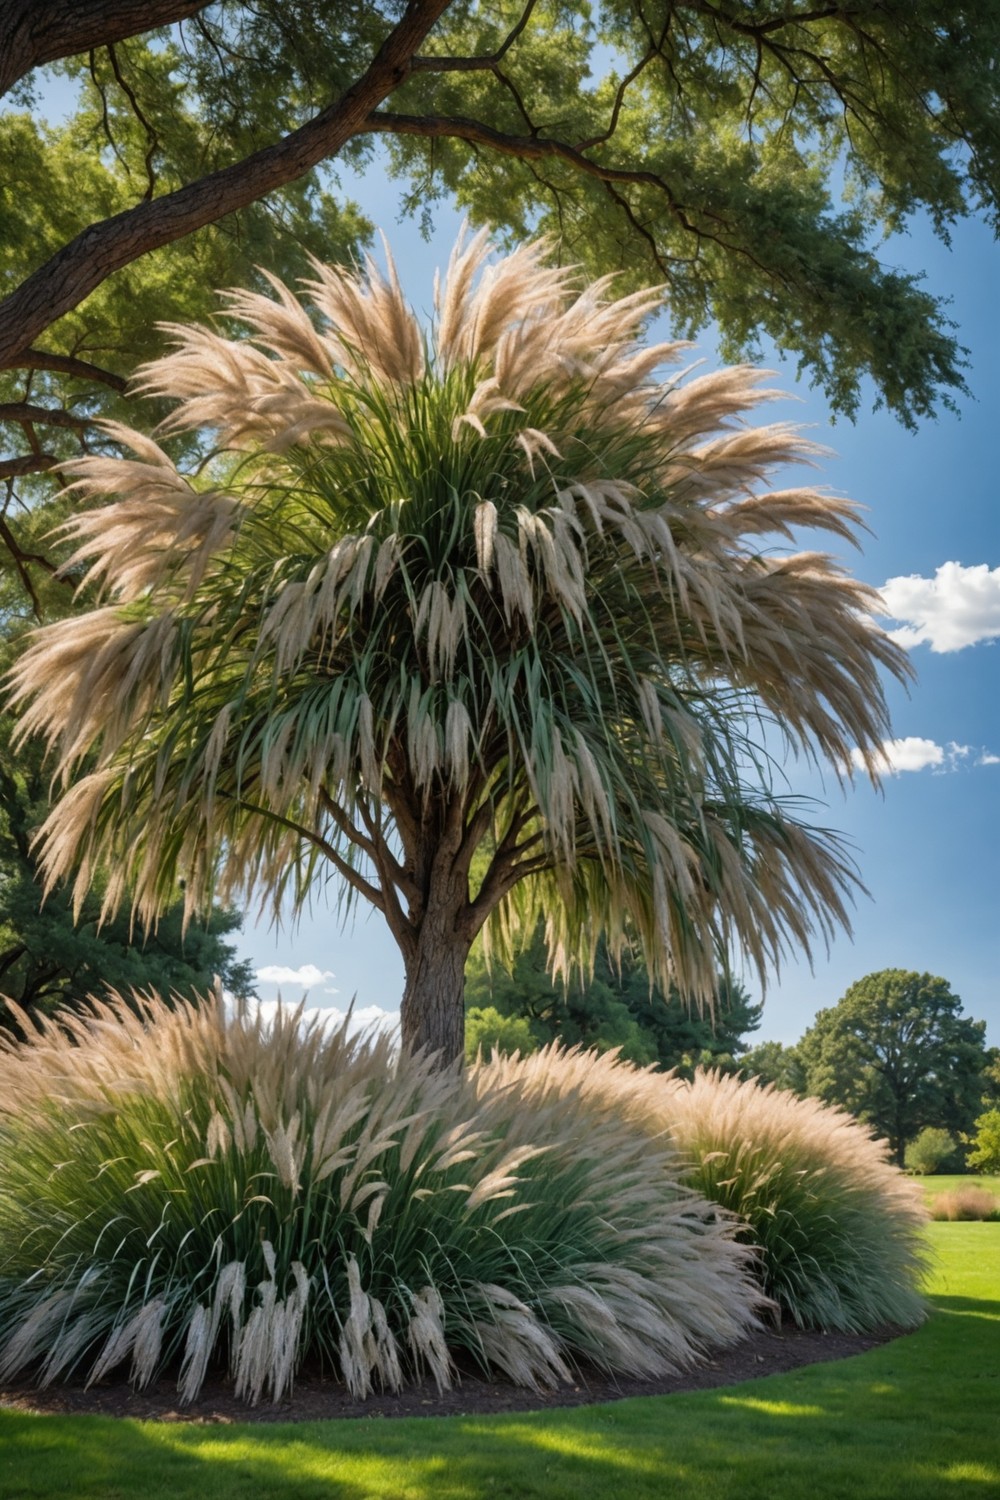 Incorporate Ornamental Grasses for Texture and Movement